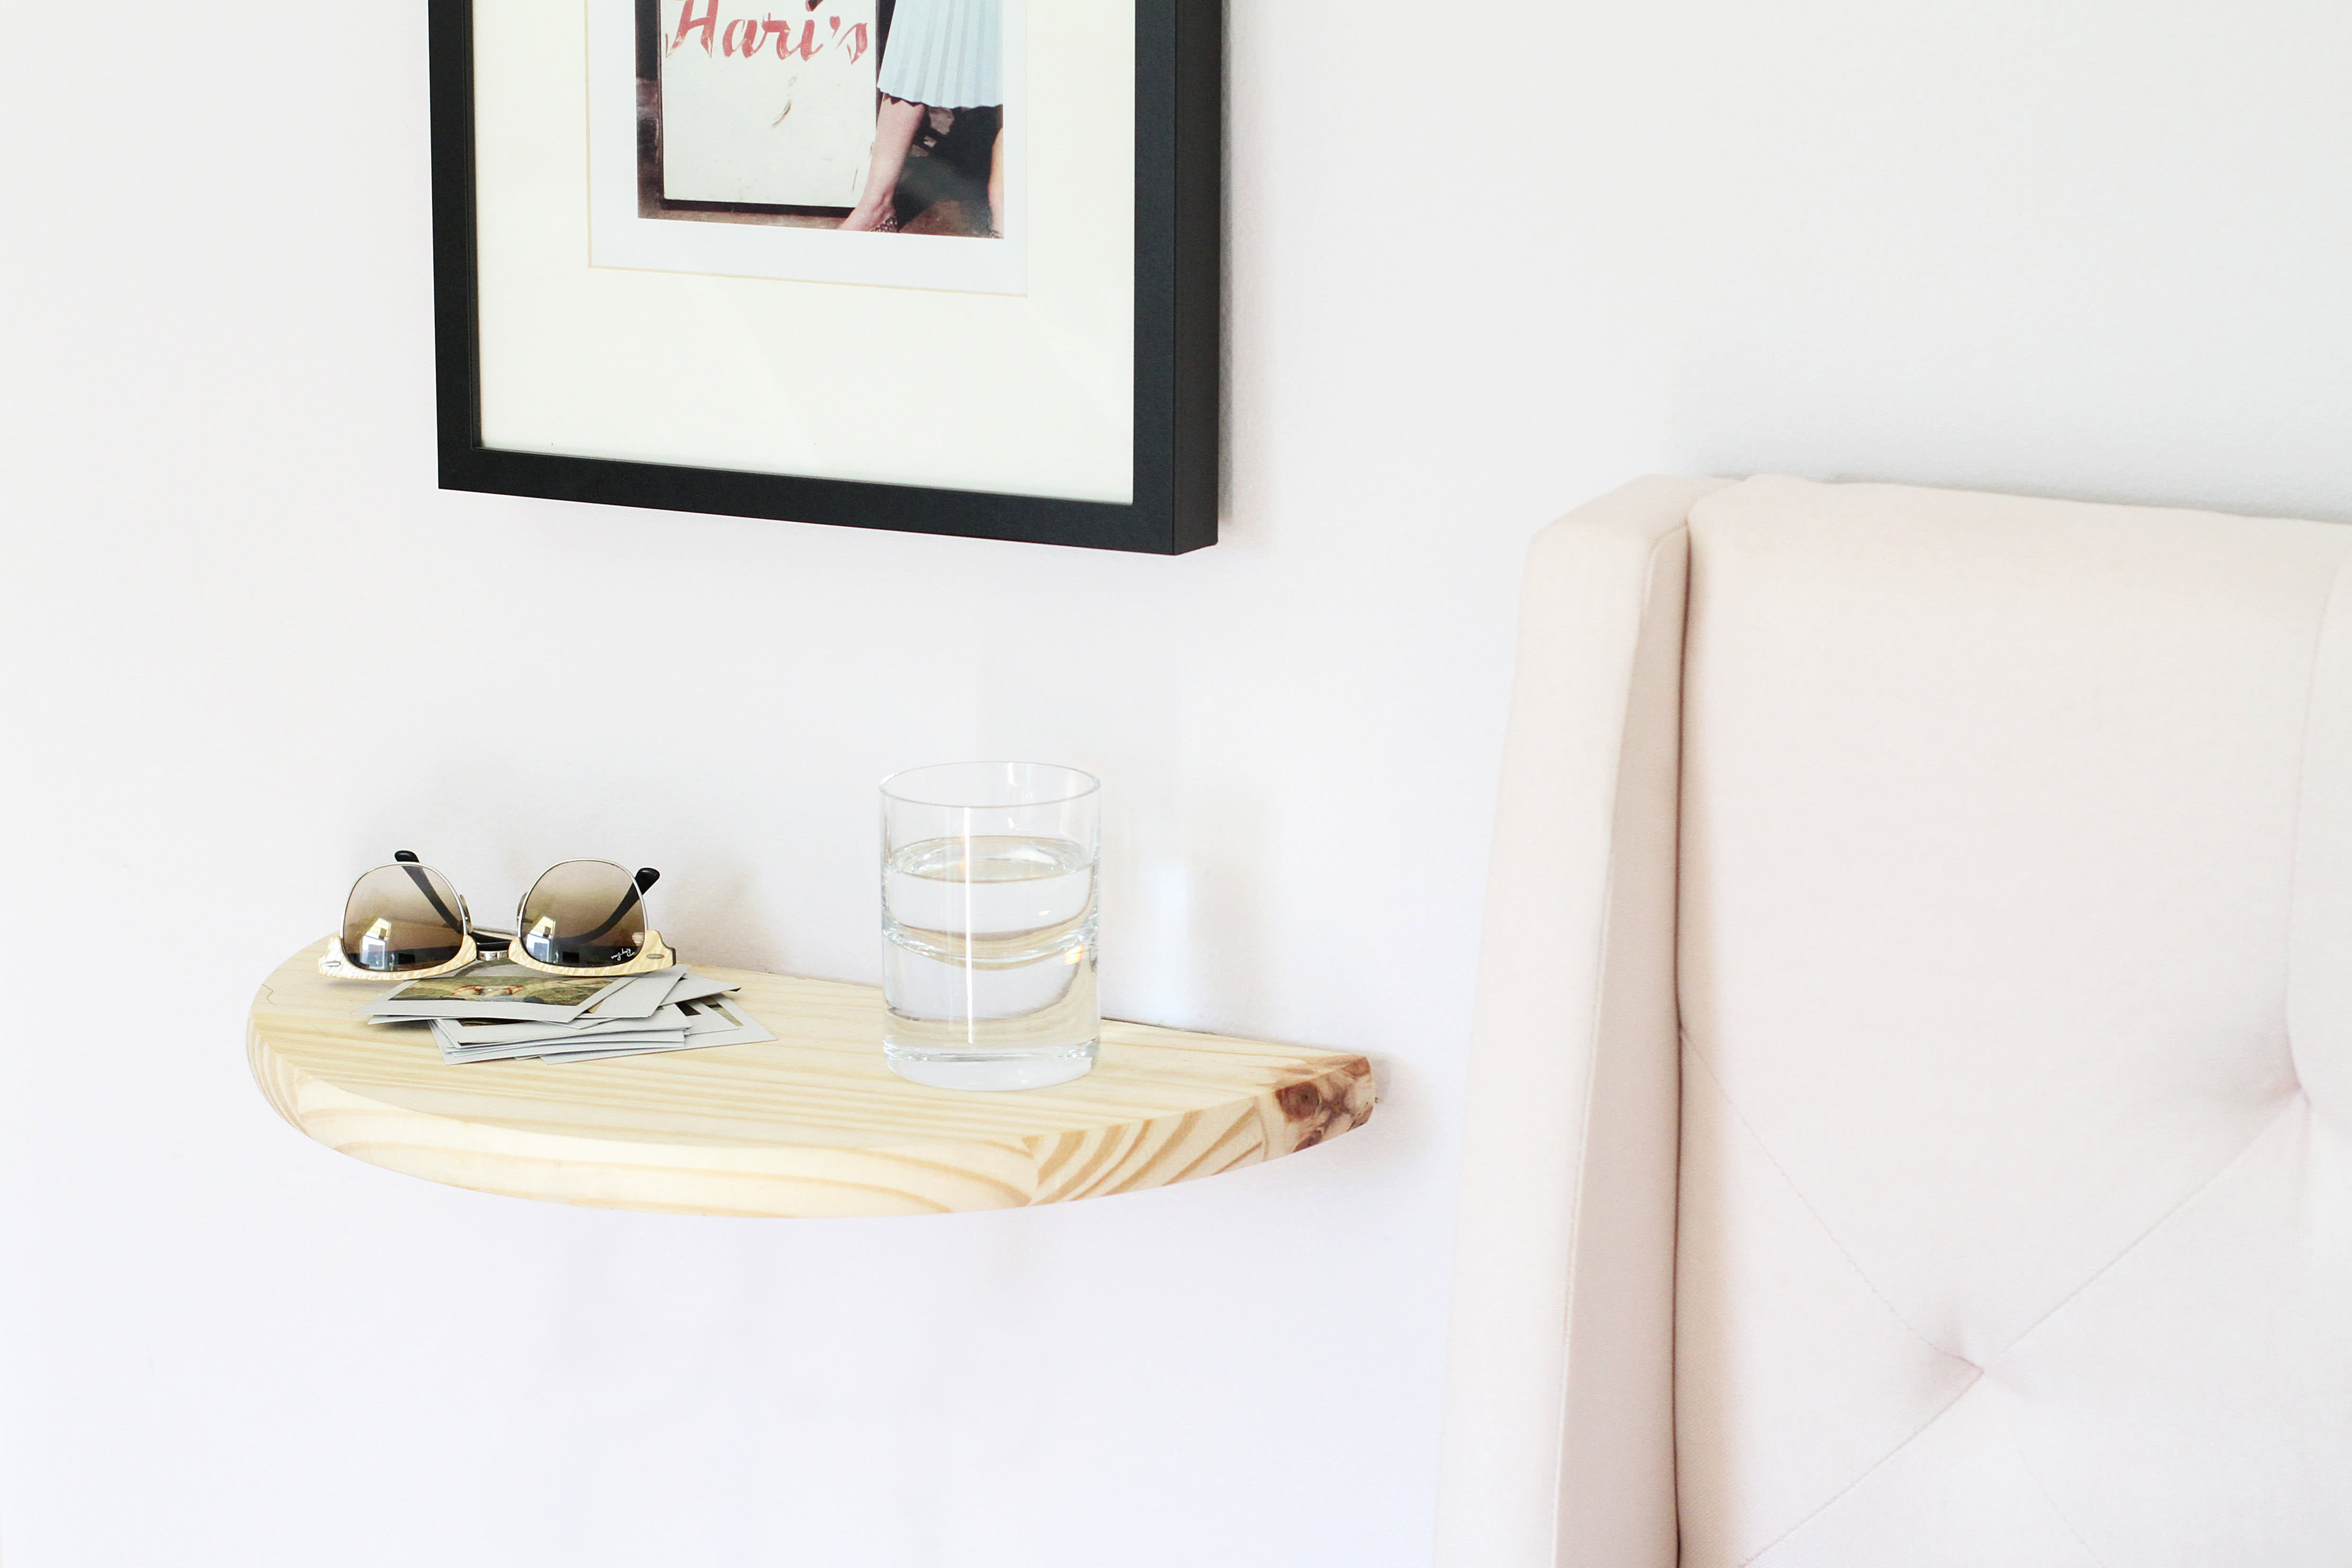 DIY floating shelves using real, solid wood - Home like you mean it